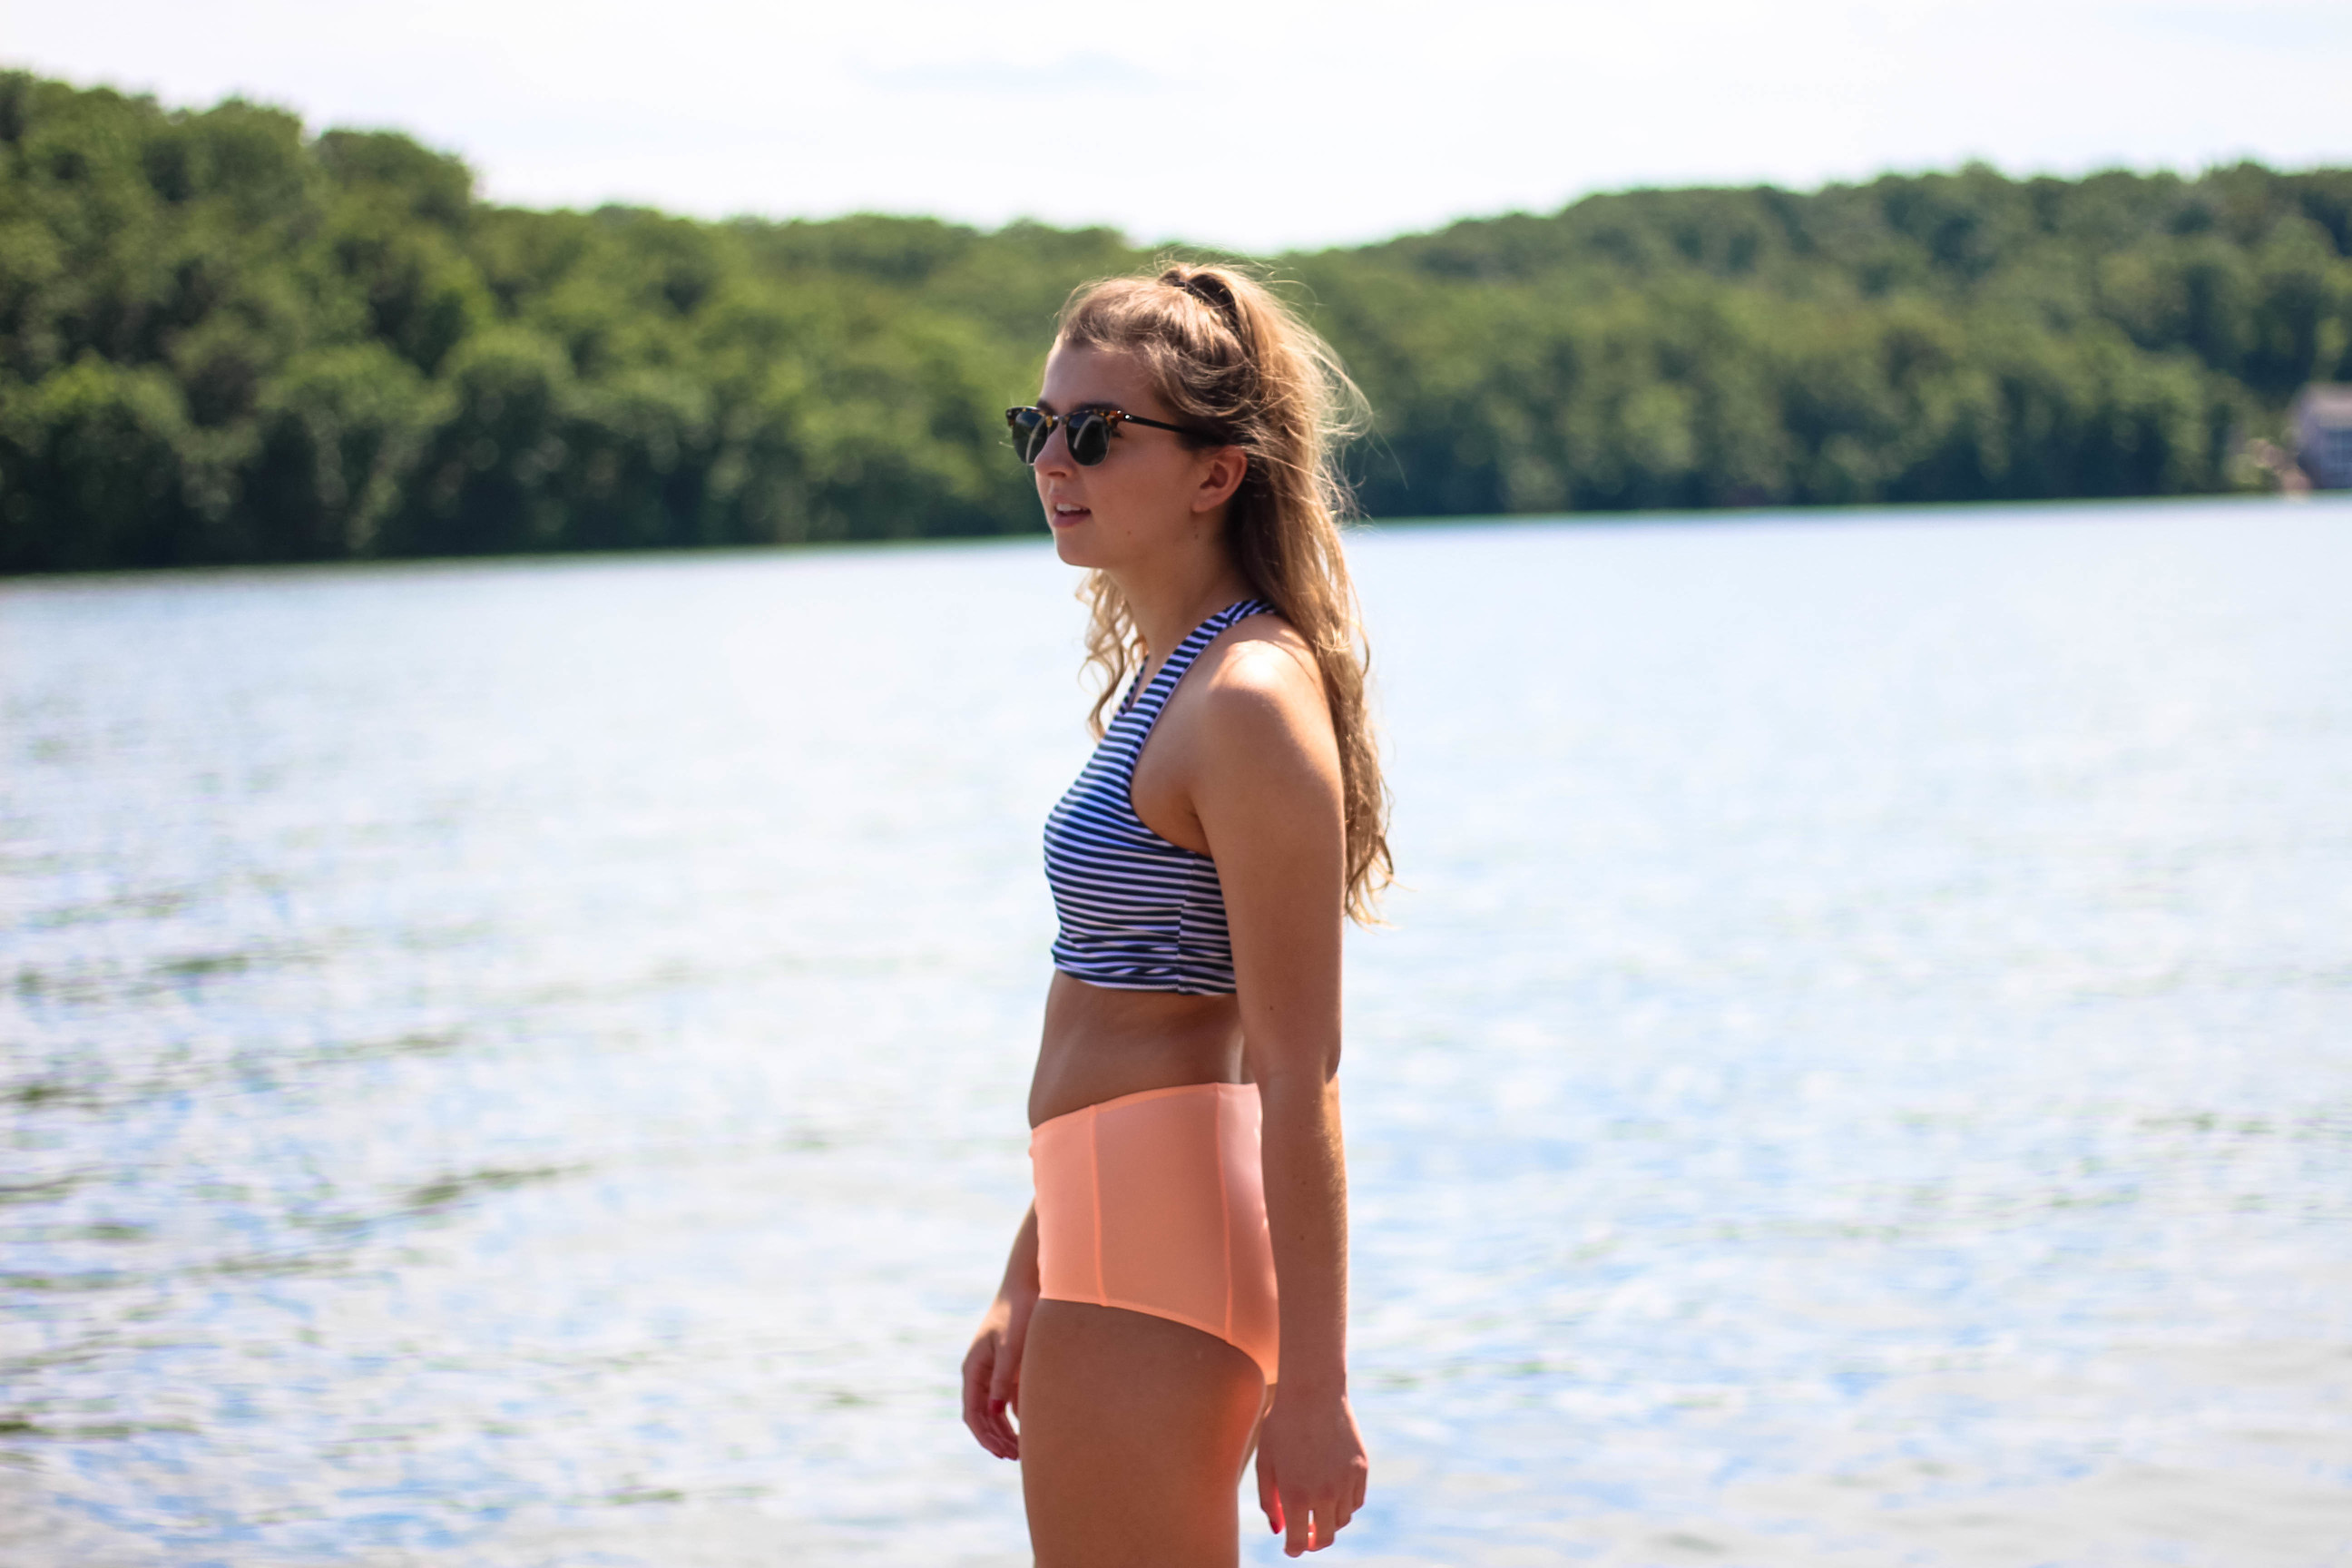 Zaful Review High Wasted Swimsuit OOTD by Daily Dose of Charm lauren lindmark